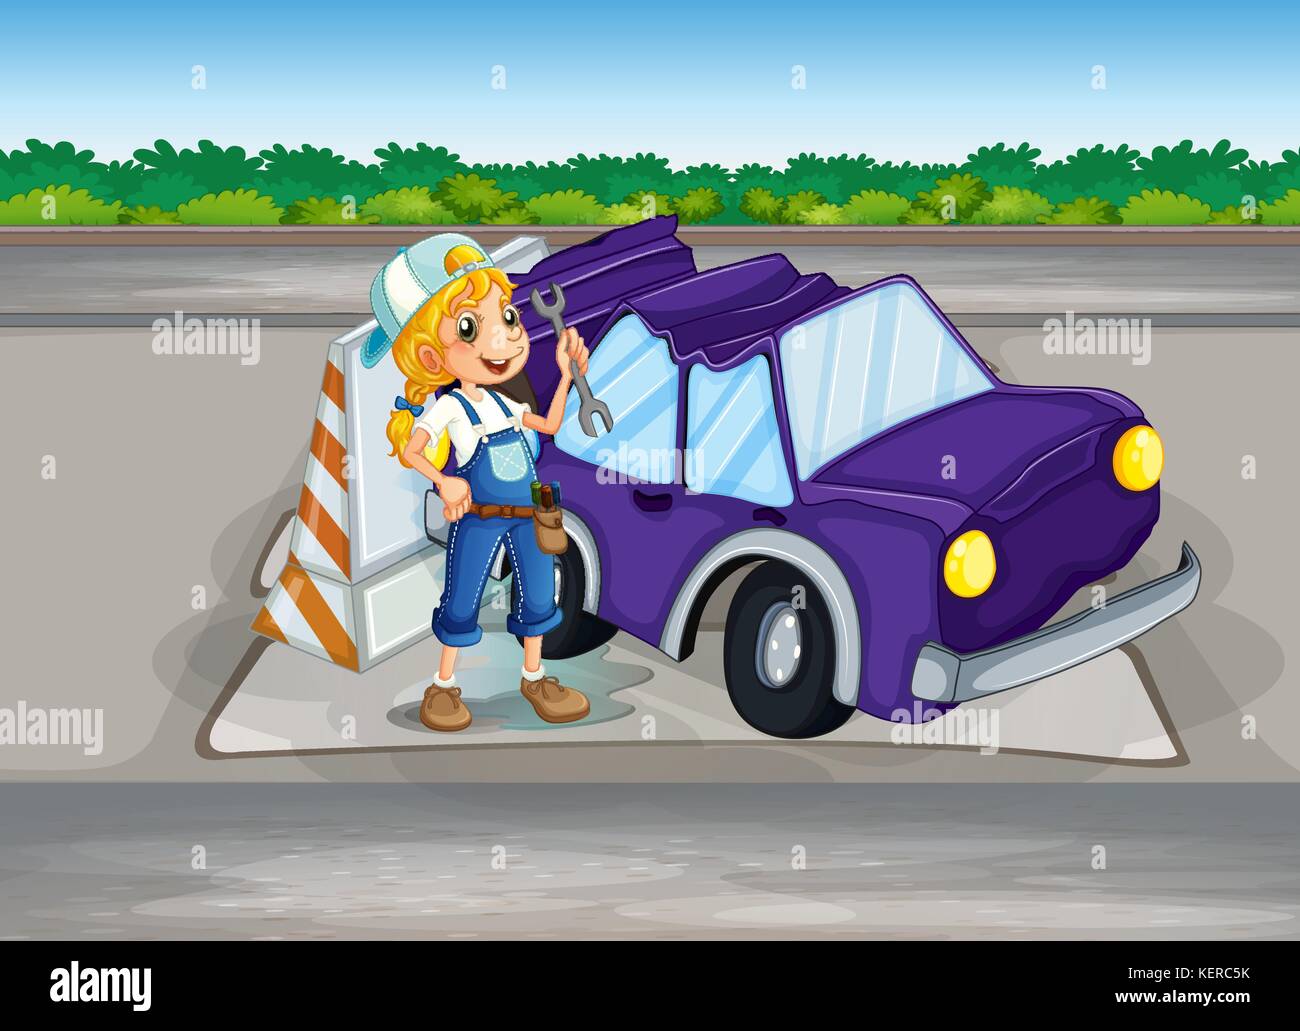 Illustration of a girl fixing a purple car Stock Vector